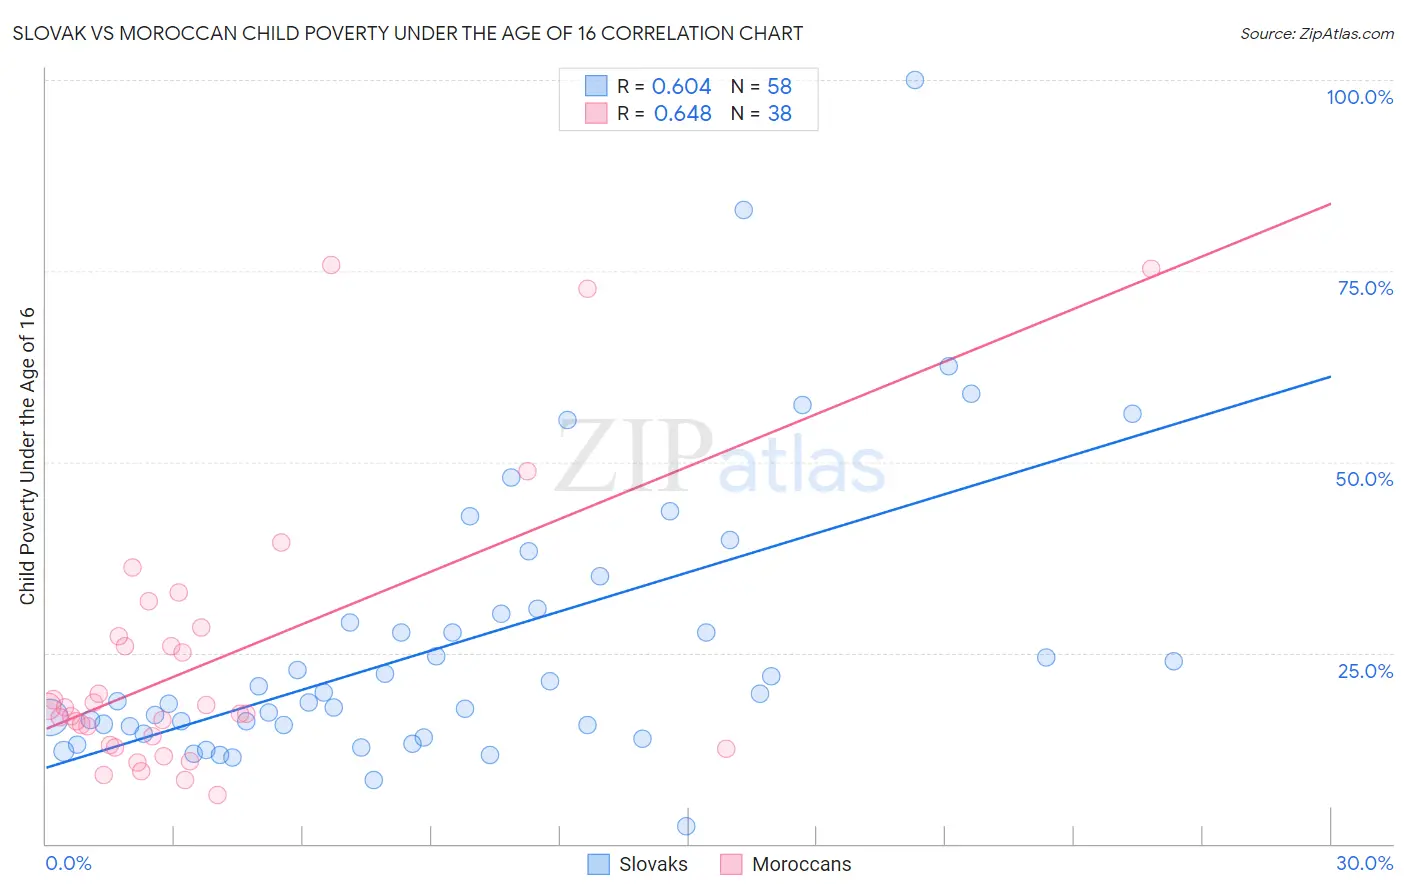 Slovak vs Moroccan Child Poverty Under the Age of 16